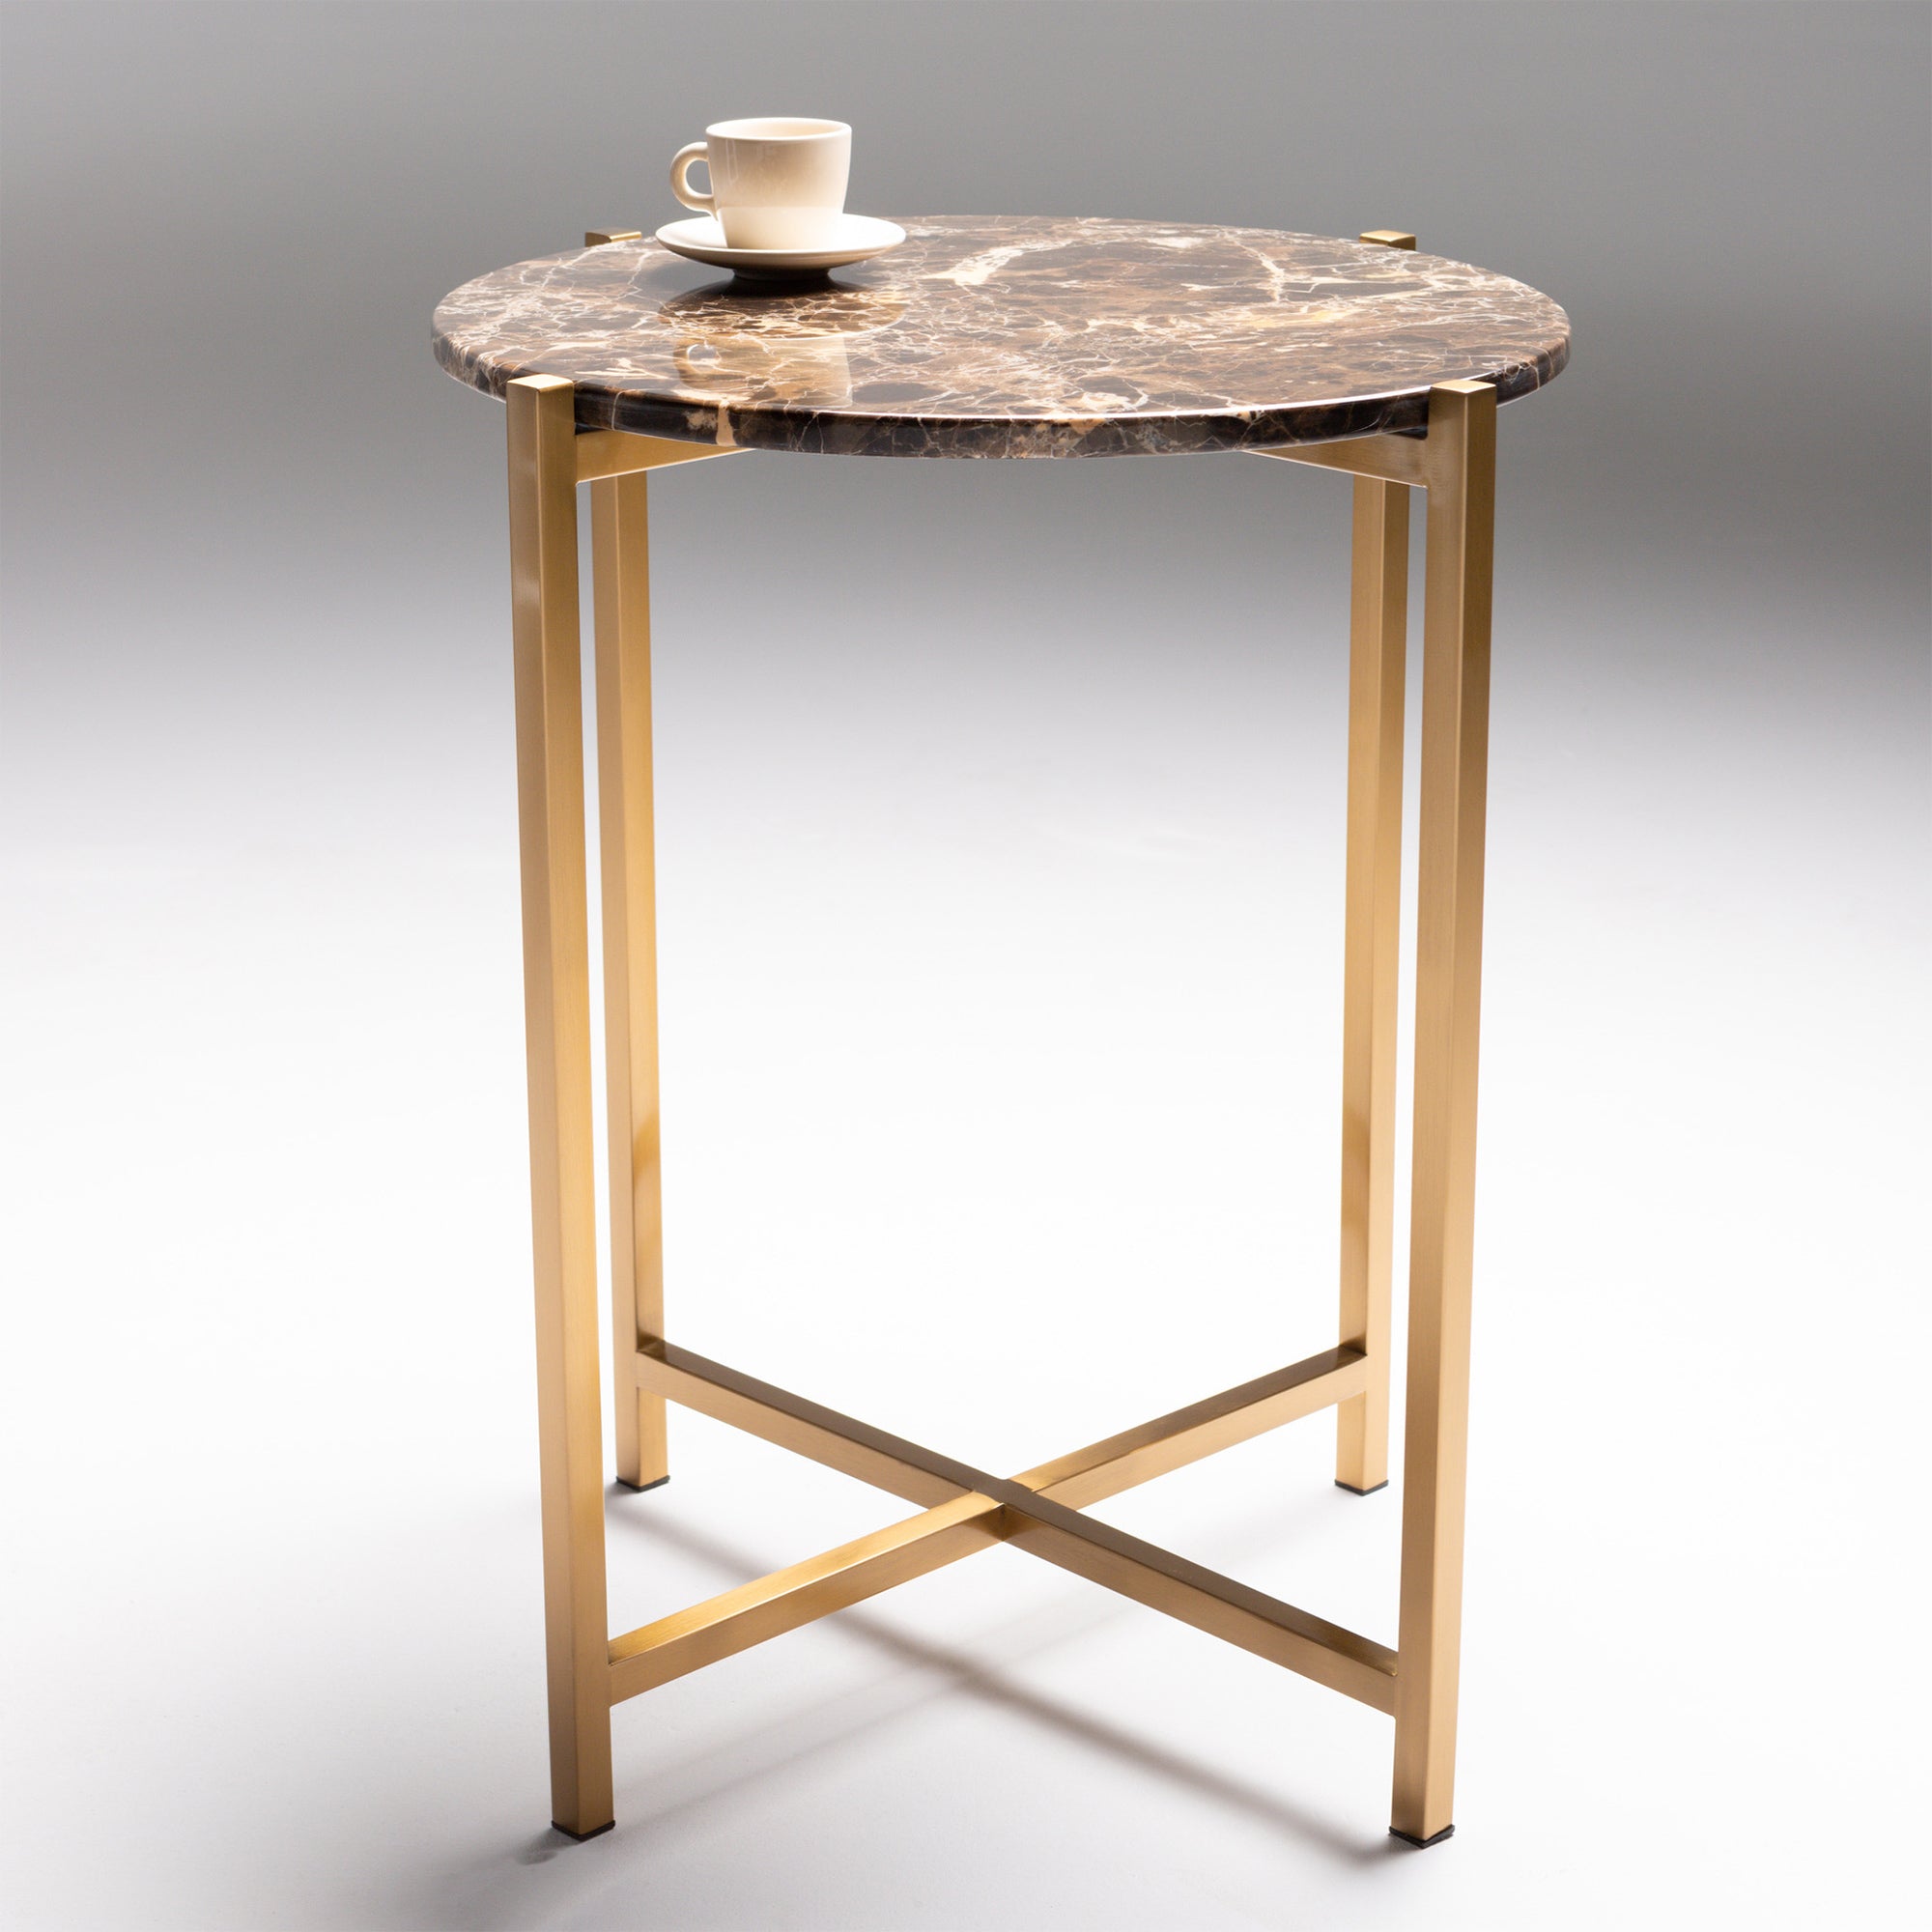 Venice - Circular Side Table In Dark Emporador With Brushed Brass Base